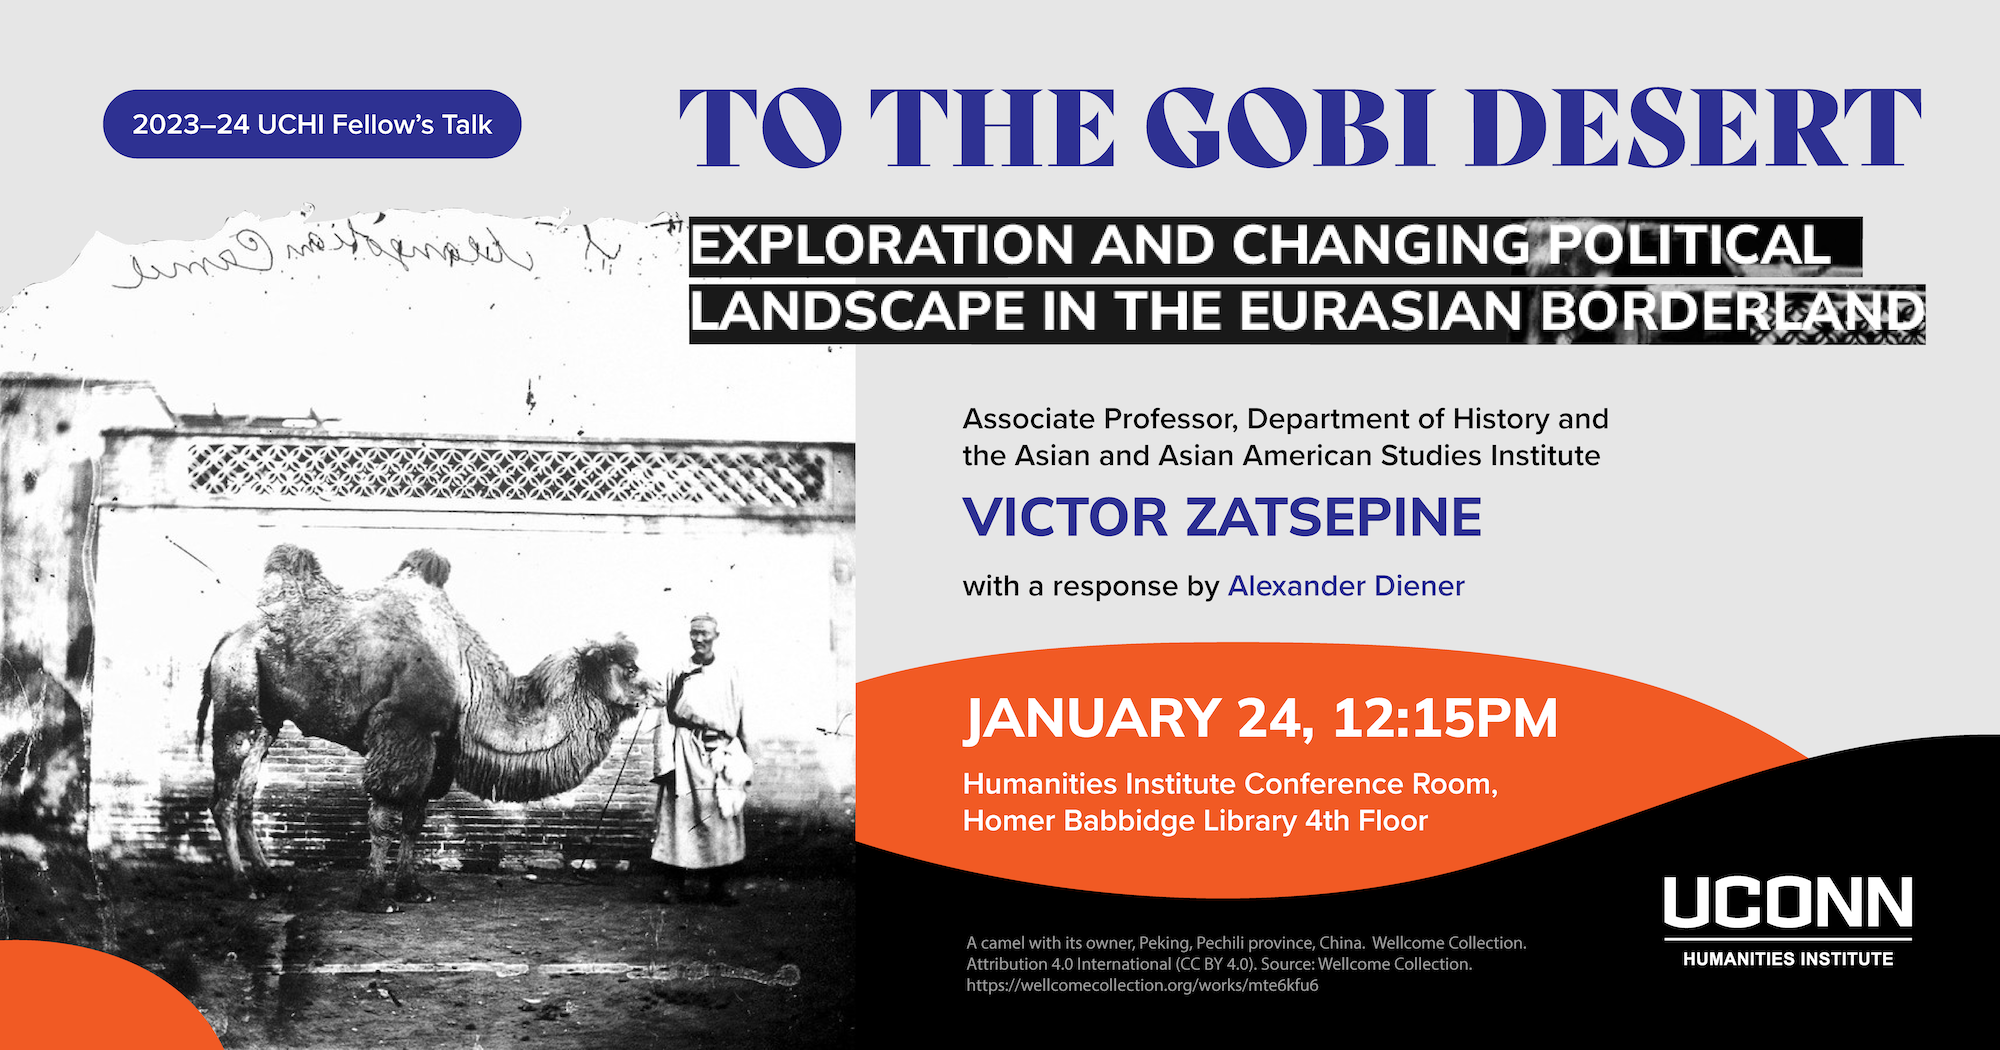 2023–24 UCHI Fellow's Talk. "To the Gobi Desert: Exploration and Changing Political Landscape in the Eurasian Borderlan." Associate Professor, History and Asian and Asian American Studies, UConn, Victor Zatsepine. with a response by Alexander Diener. January 24, 12:15pm. UCHI Conference Room, Homer Babbidge Library, 4-209.